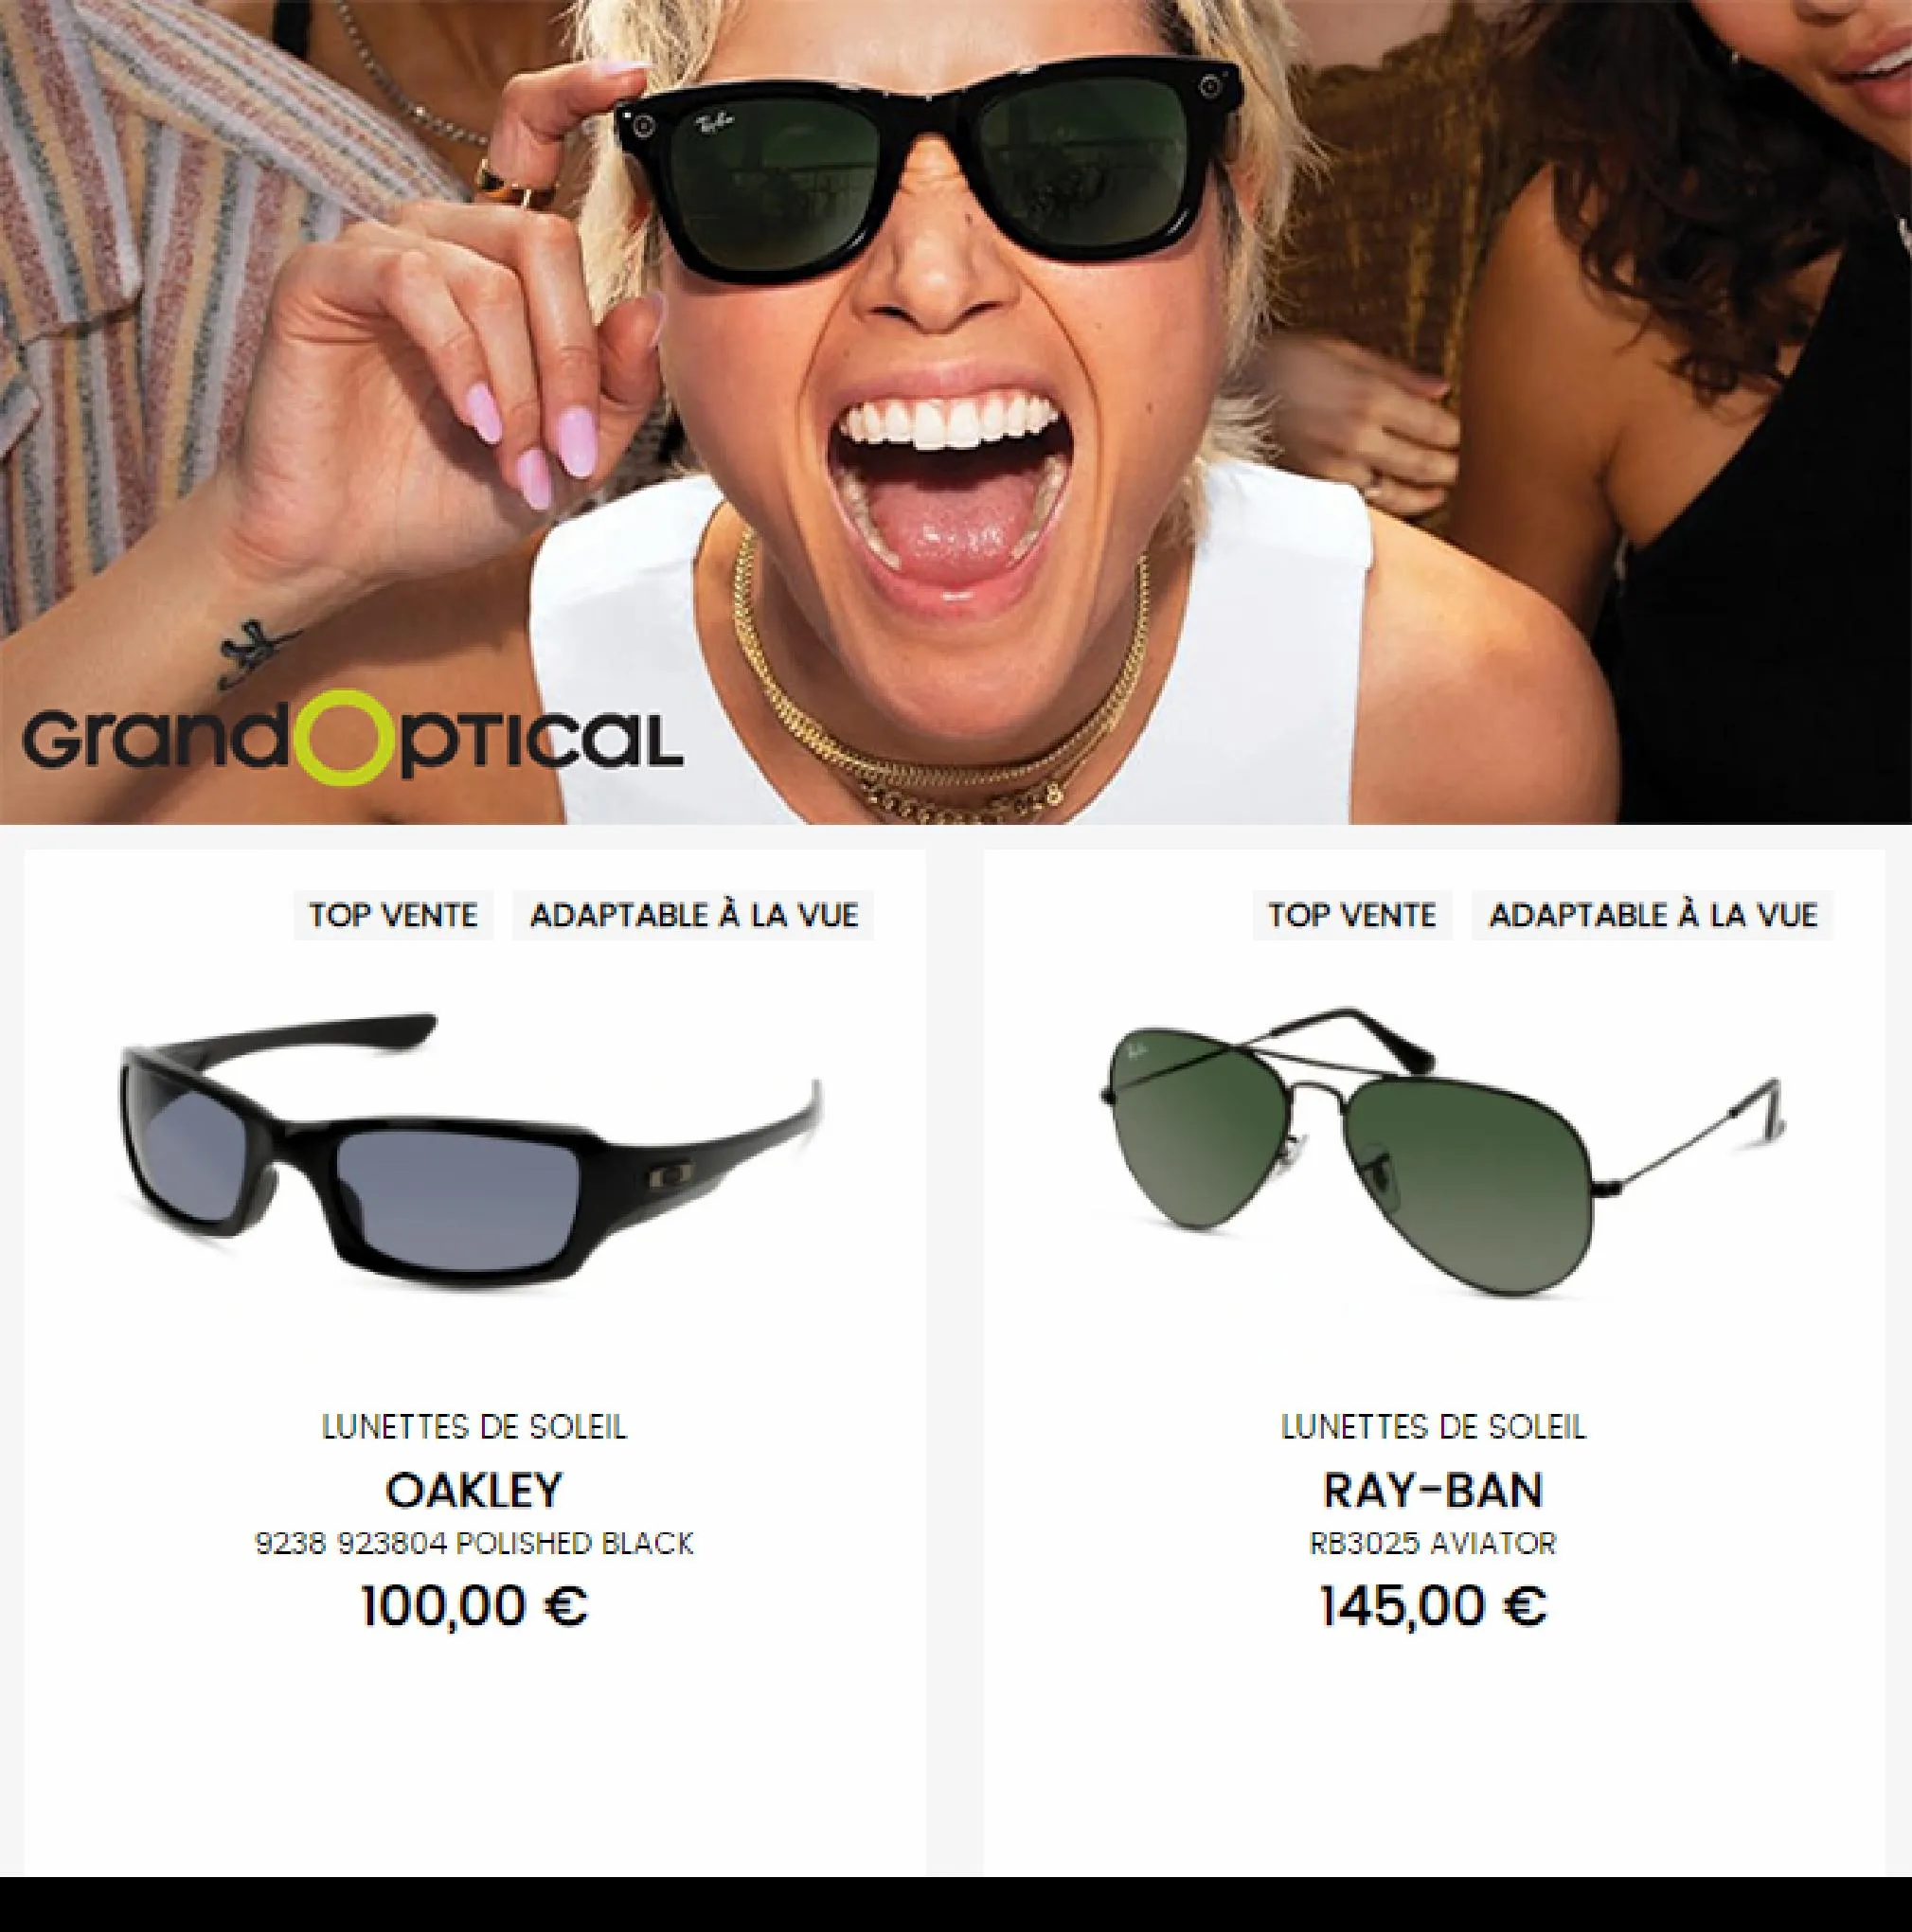 Catalogue Soldes Grand Optical, page 00005